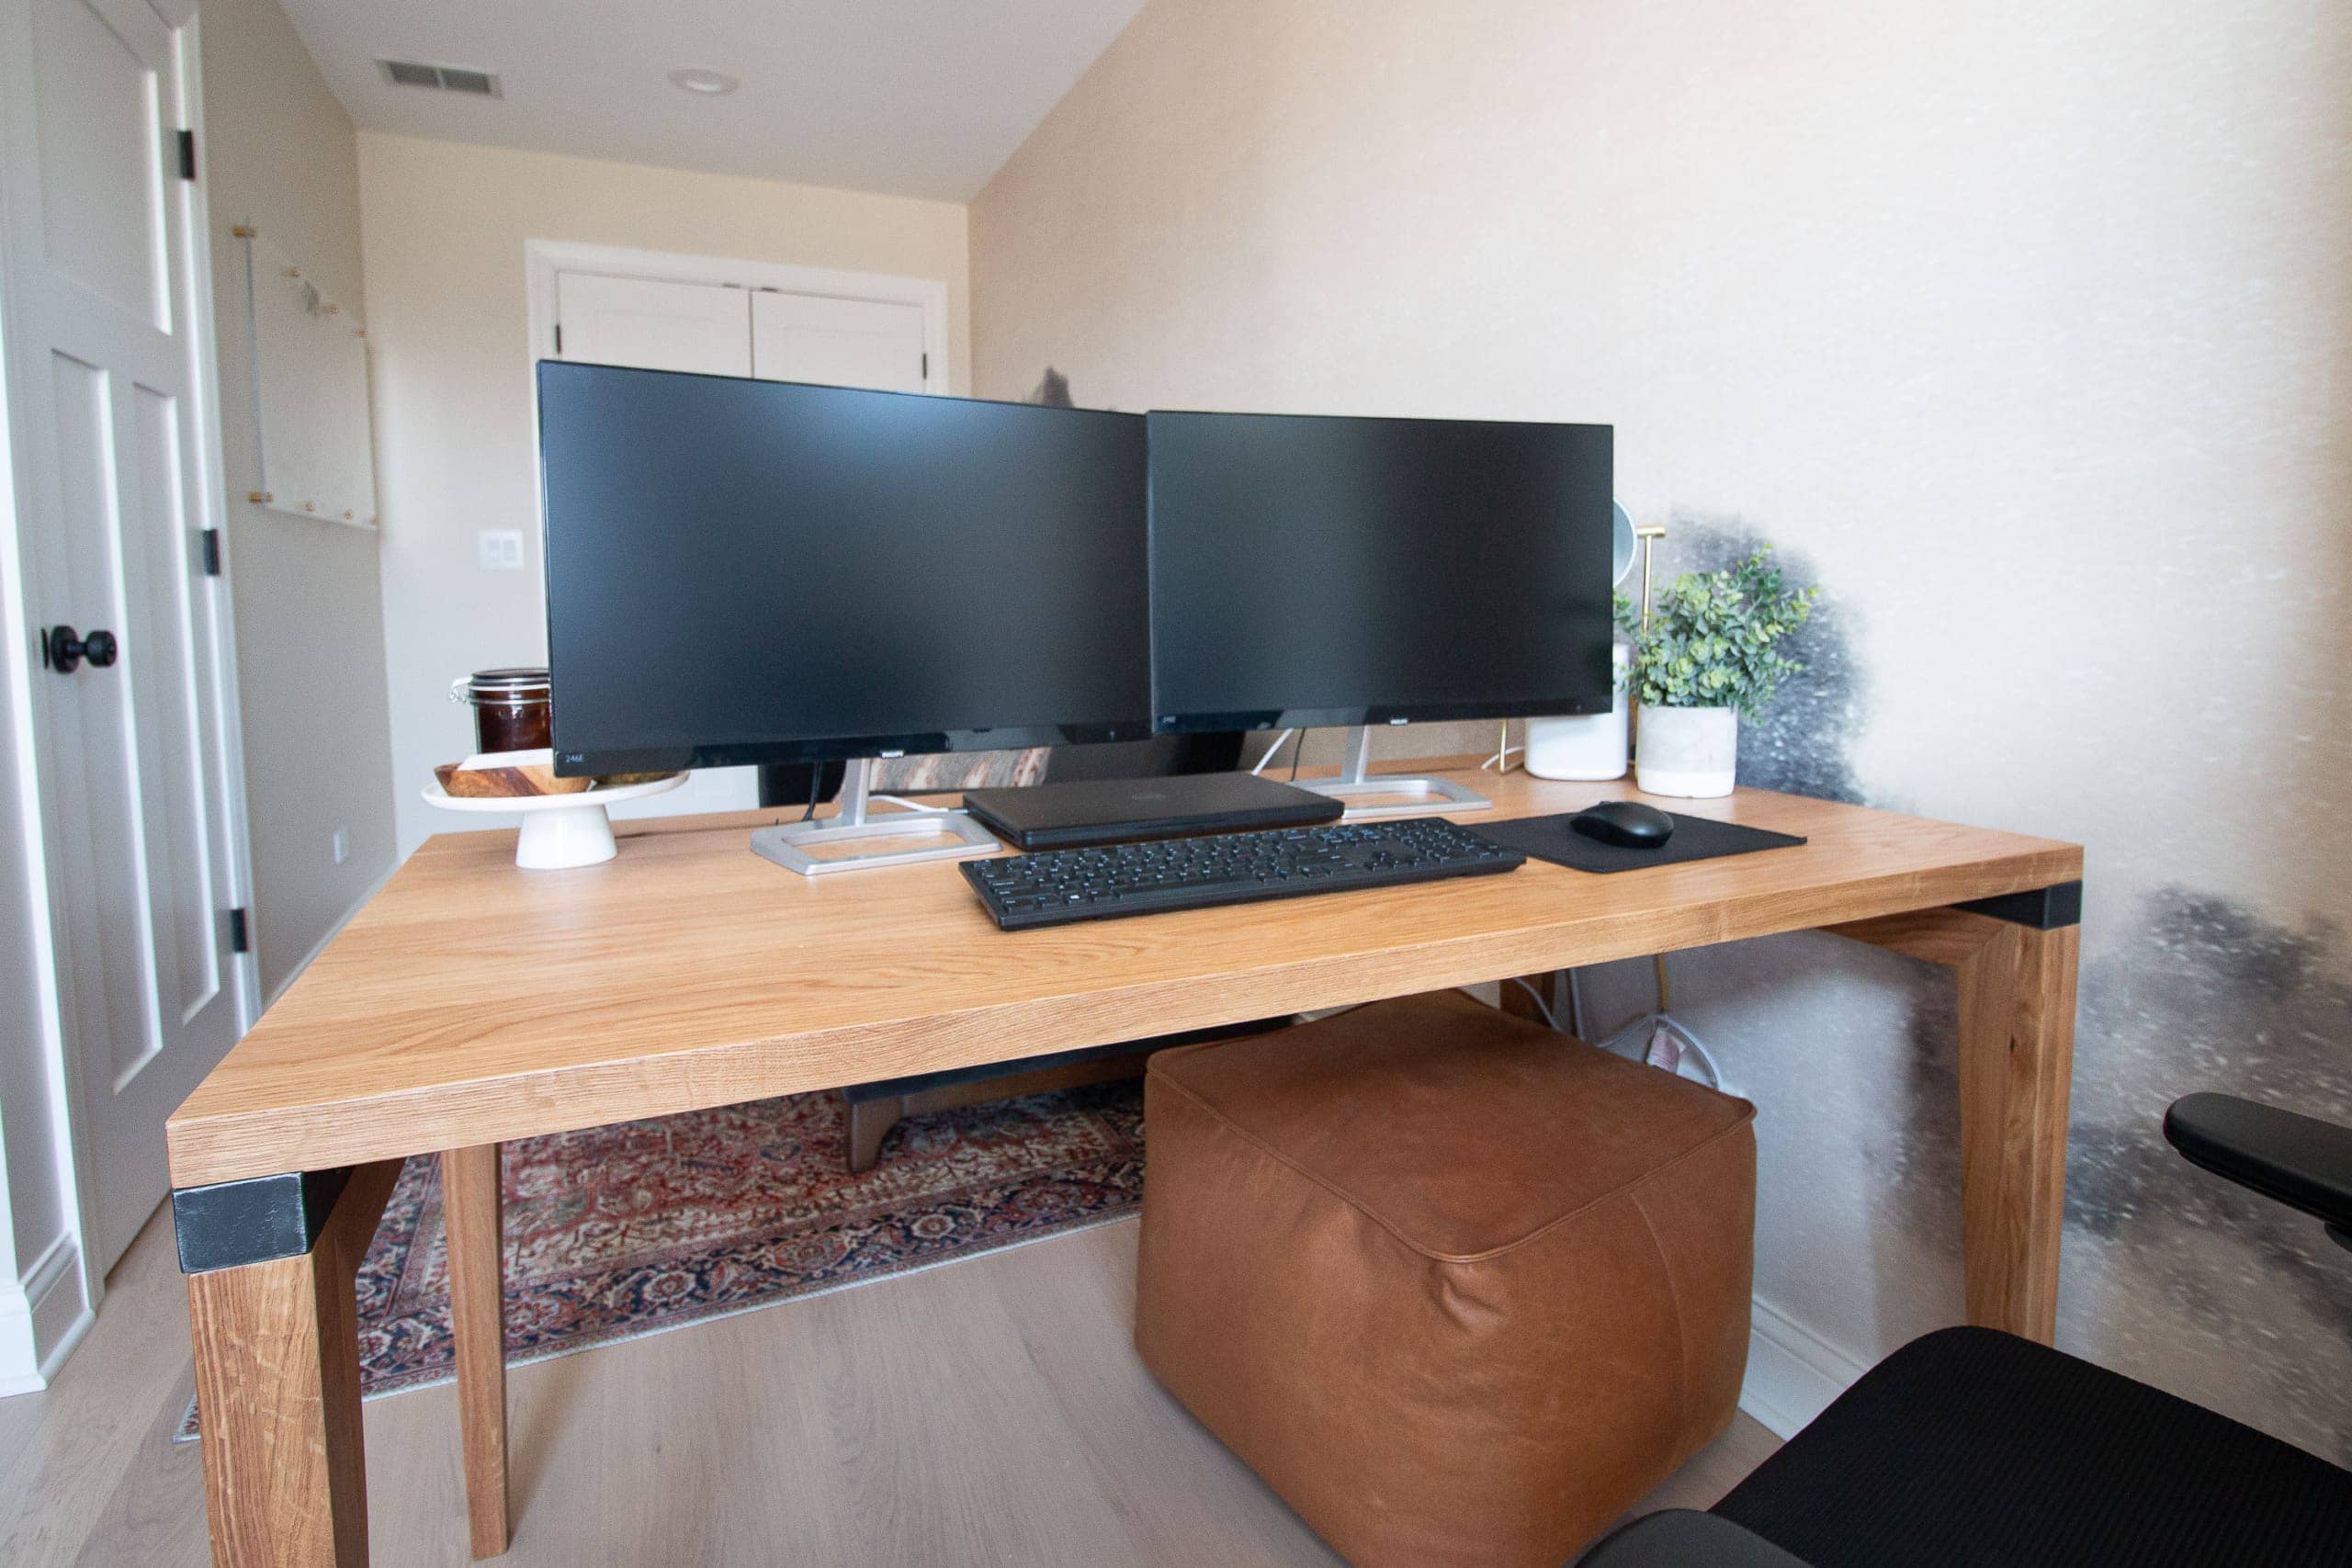 Two desktop monitors that are sleek and perfect for your work from home office